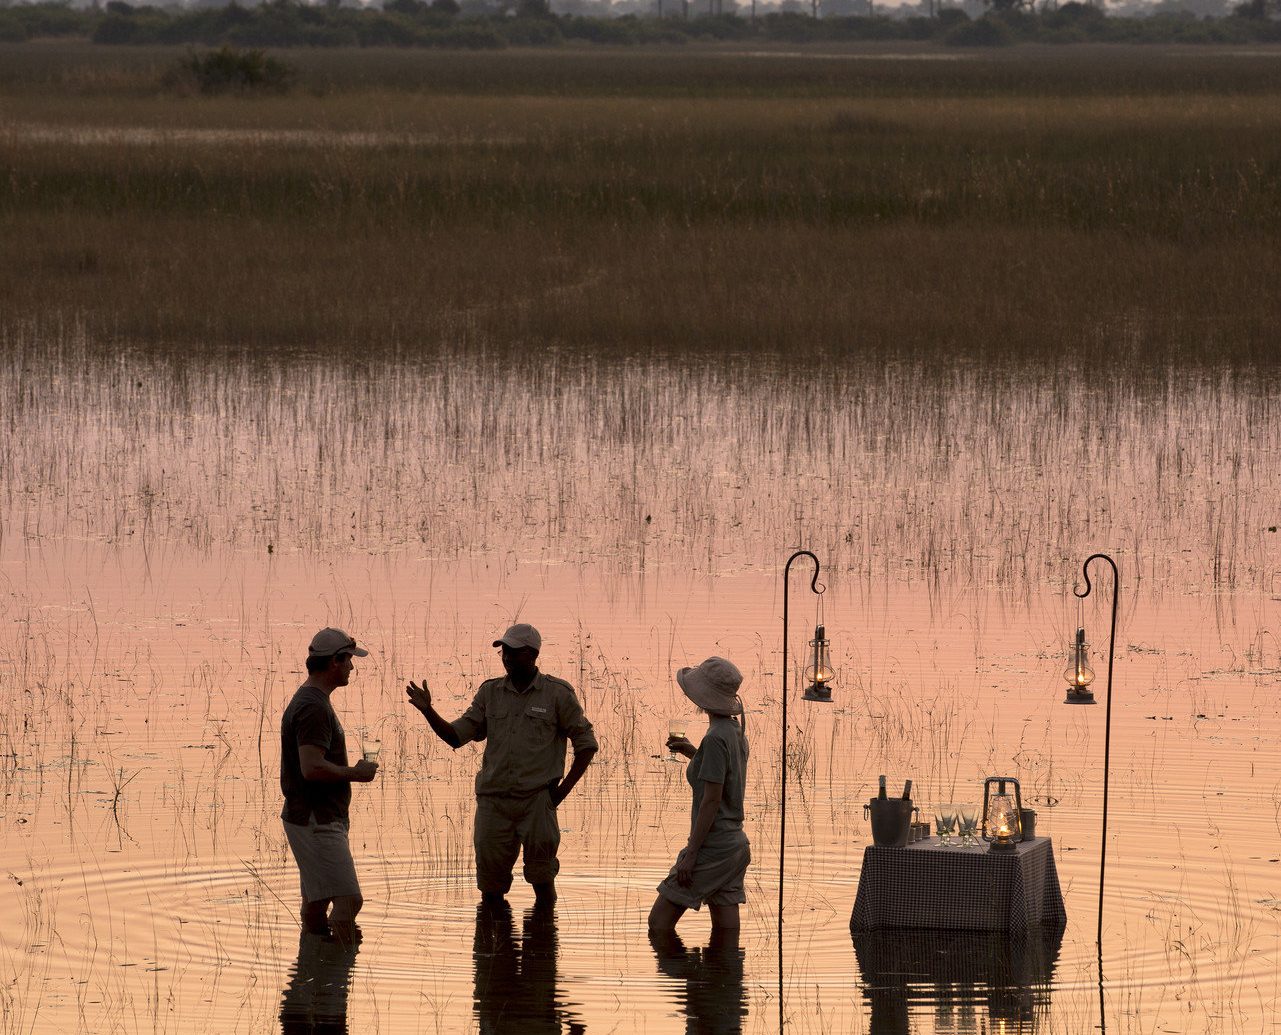 calm fisherman fishing golden hour grass Lake Luxury Nature Outdoor Activities outdoor dining Outdoors people reflection remote River Safari serene silhouette sunrise Sunset Trip Ideas outdoor atmospheric phenomenon natural environment morning dawn wetland evening